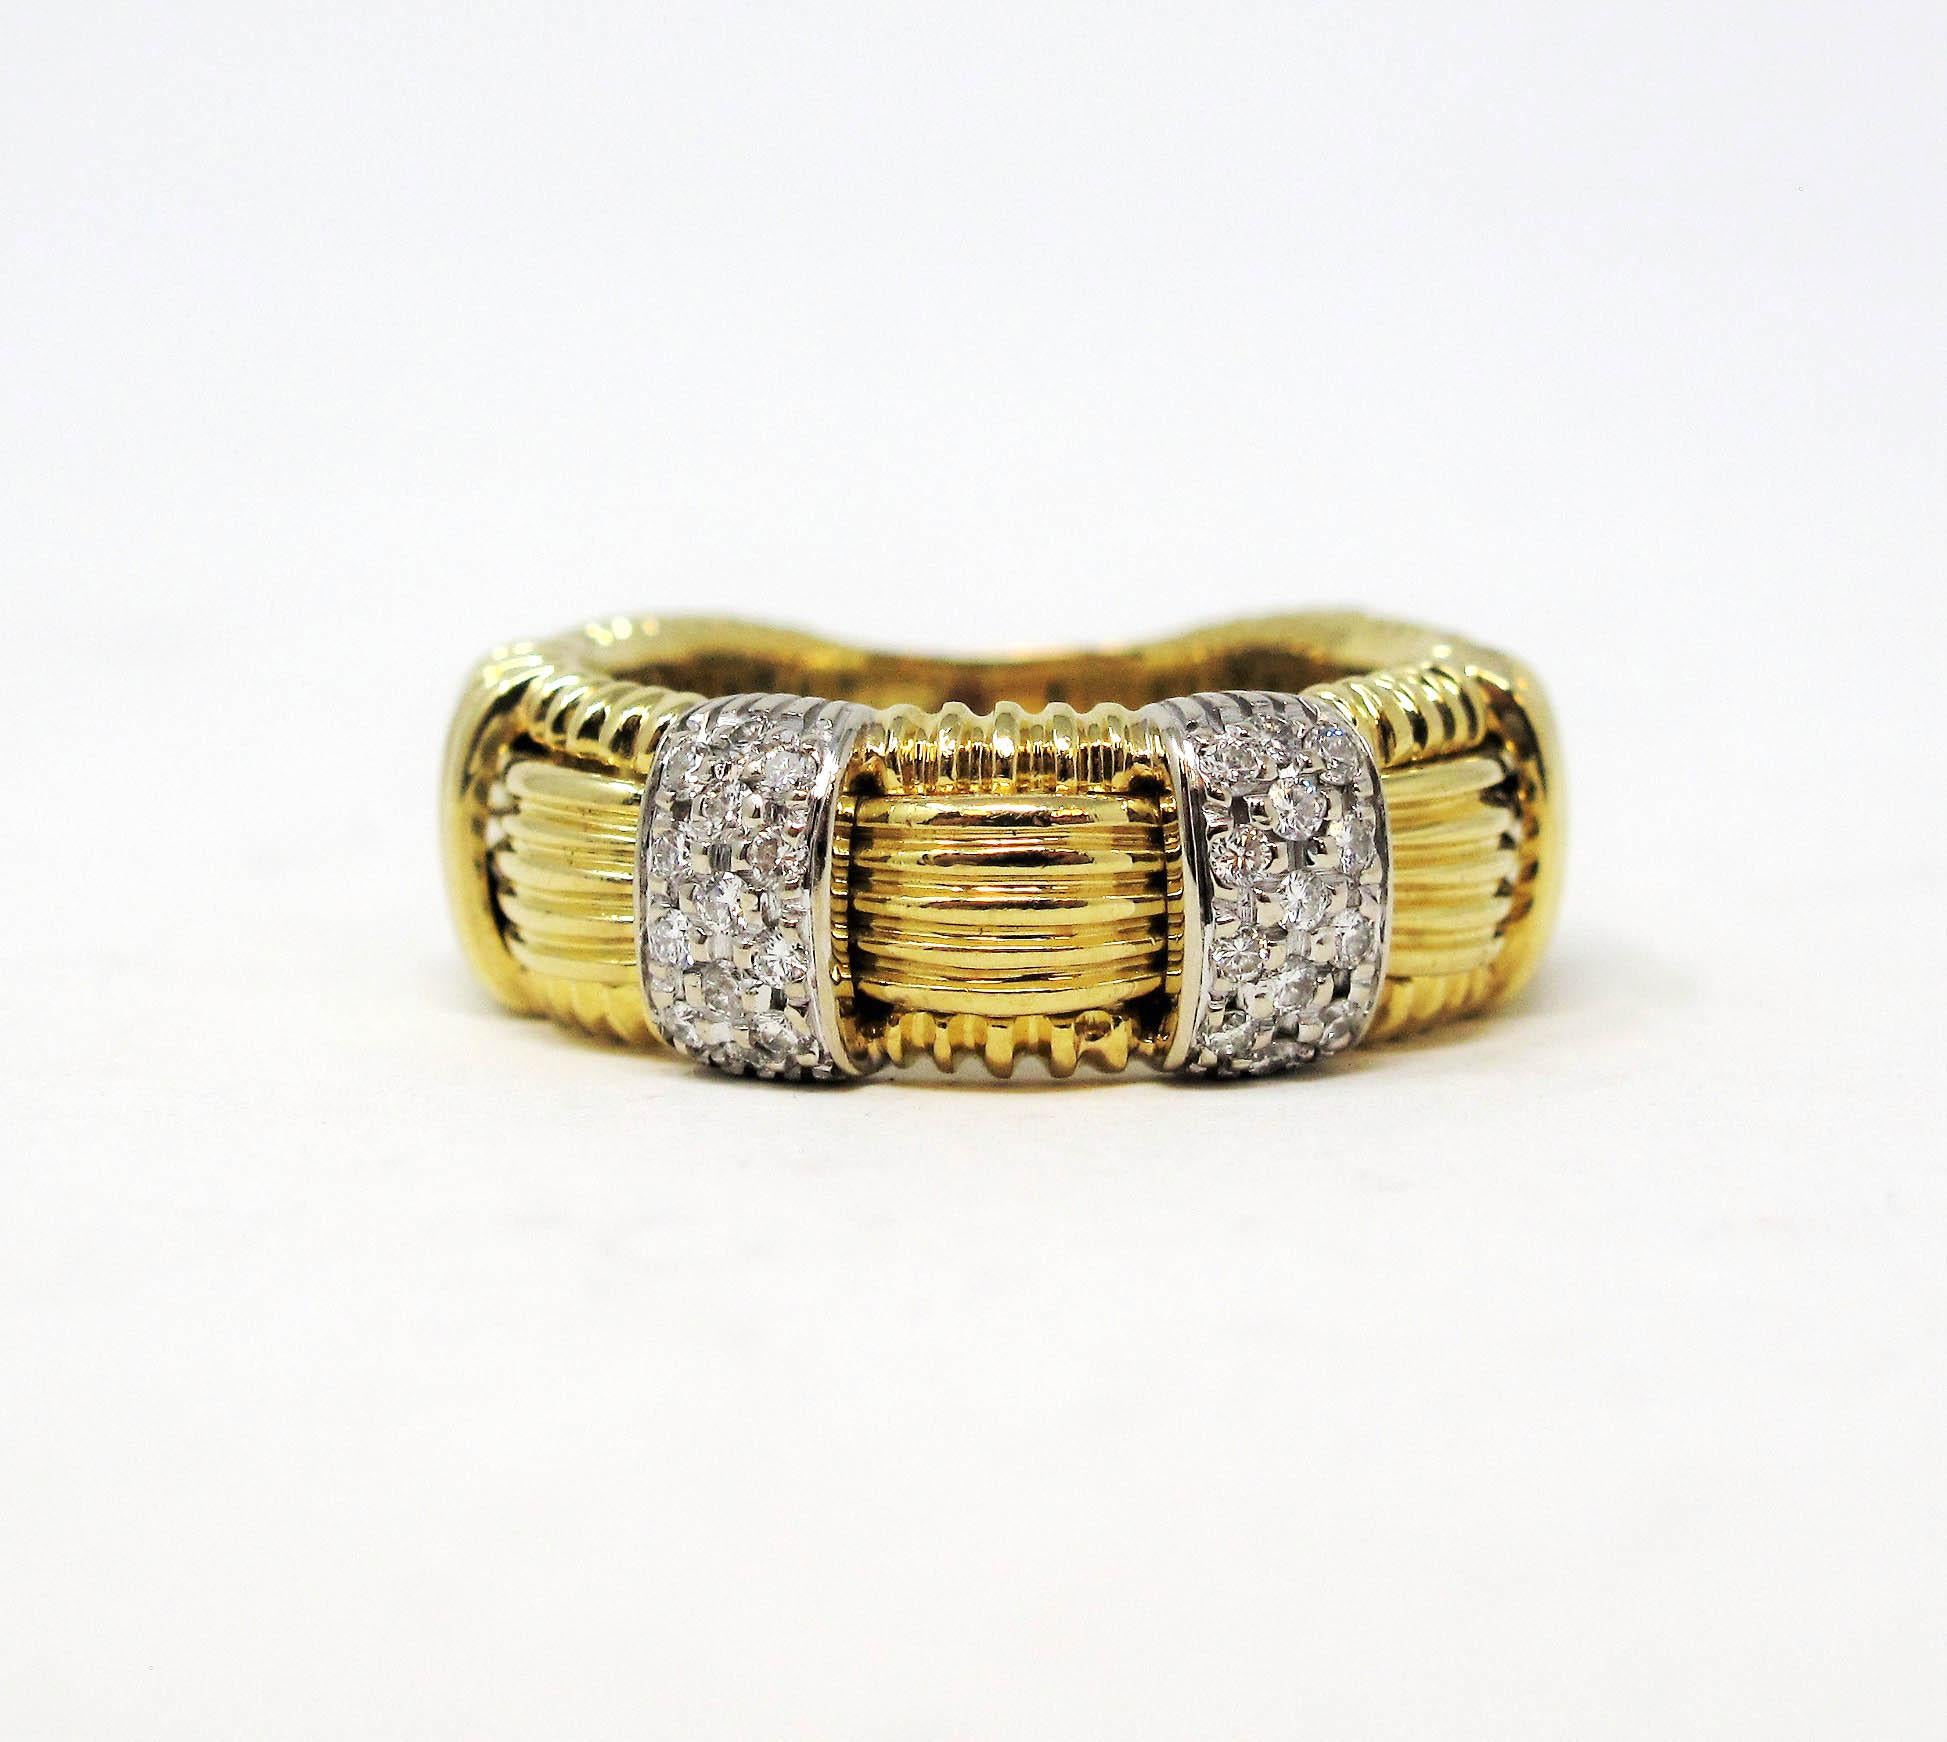 Ring Size: 7

Simple yet stunning 18 karat gold and pave diamond band ring by jewelry designer, Roberto Coin. The striking contrast of the icy white diamonds against the golden hue of the metal allows the diamonds to really pop, while the basket